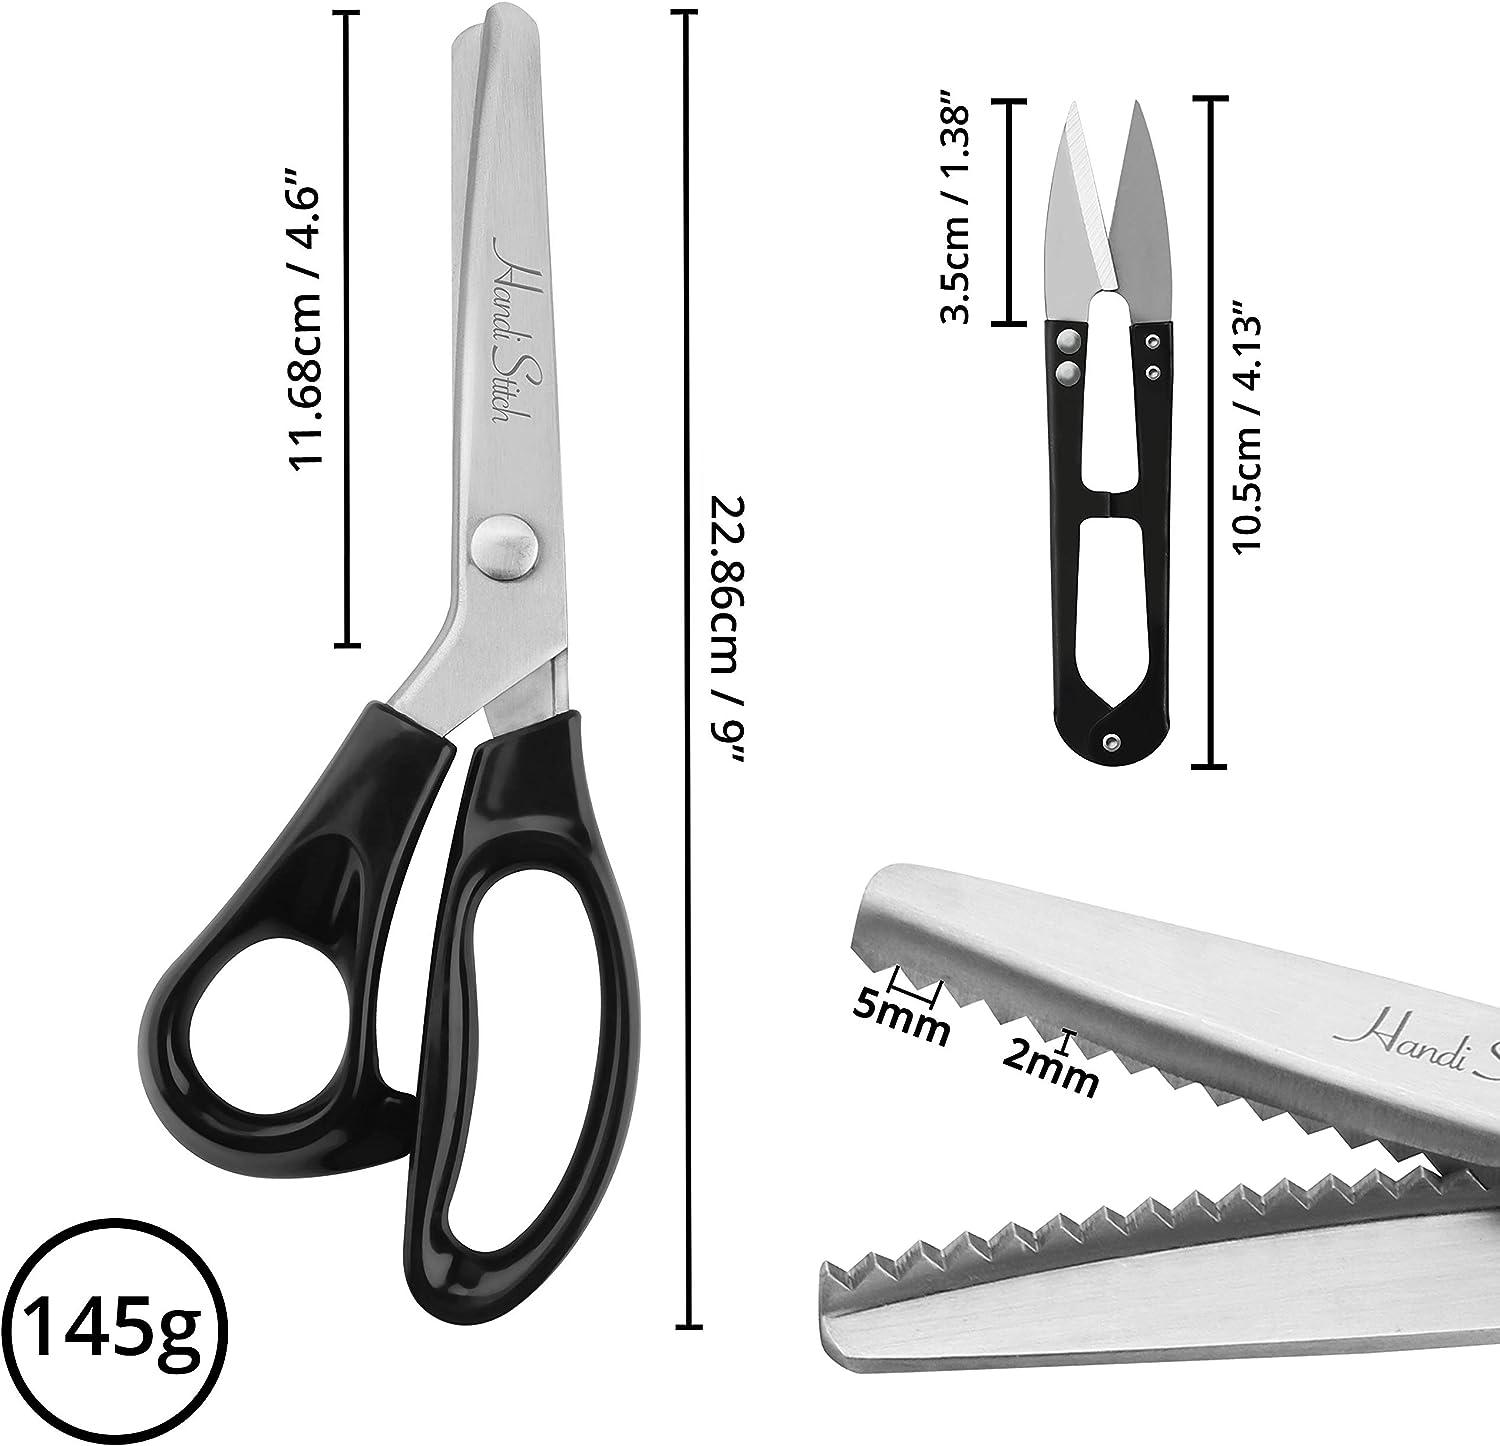 HANDI STITCH Pinking Shears with Snippers - 9 inch/22.86cm Overall